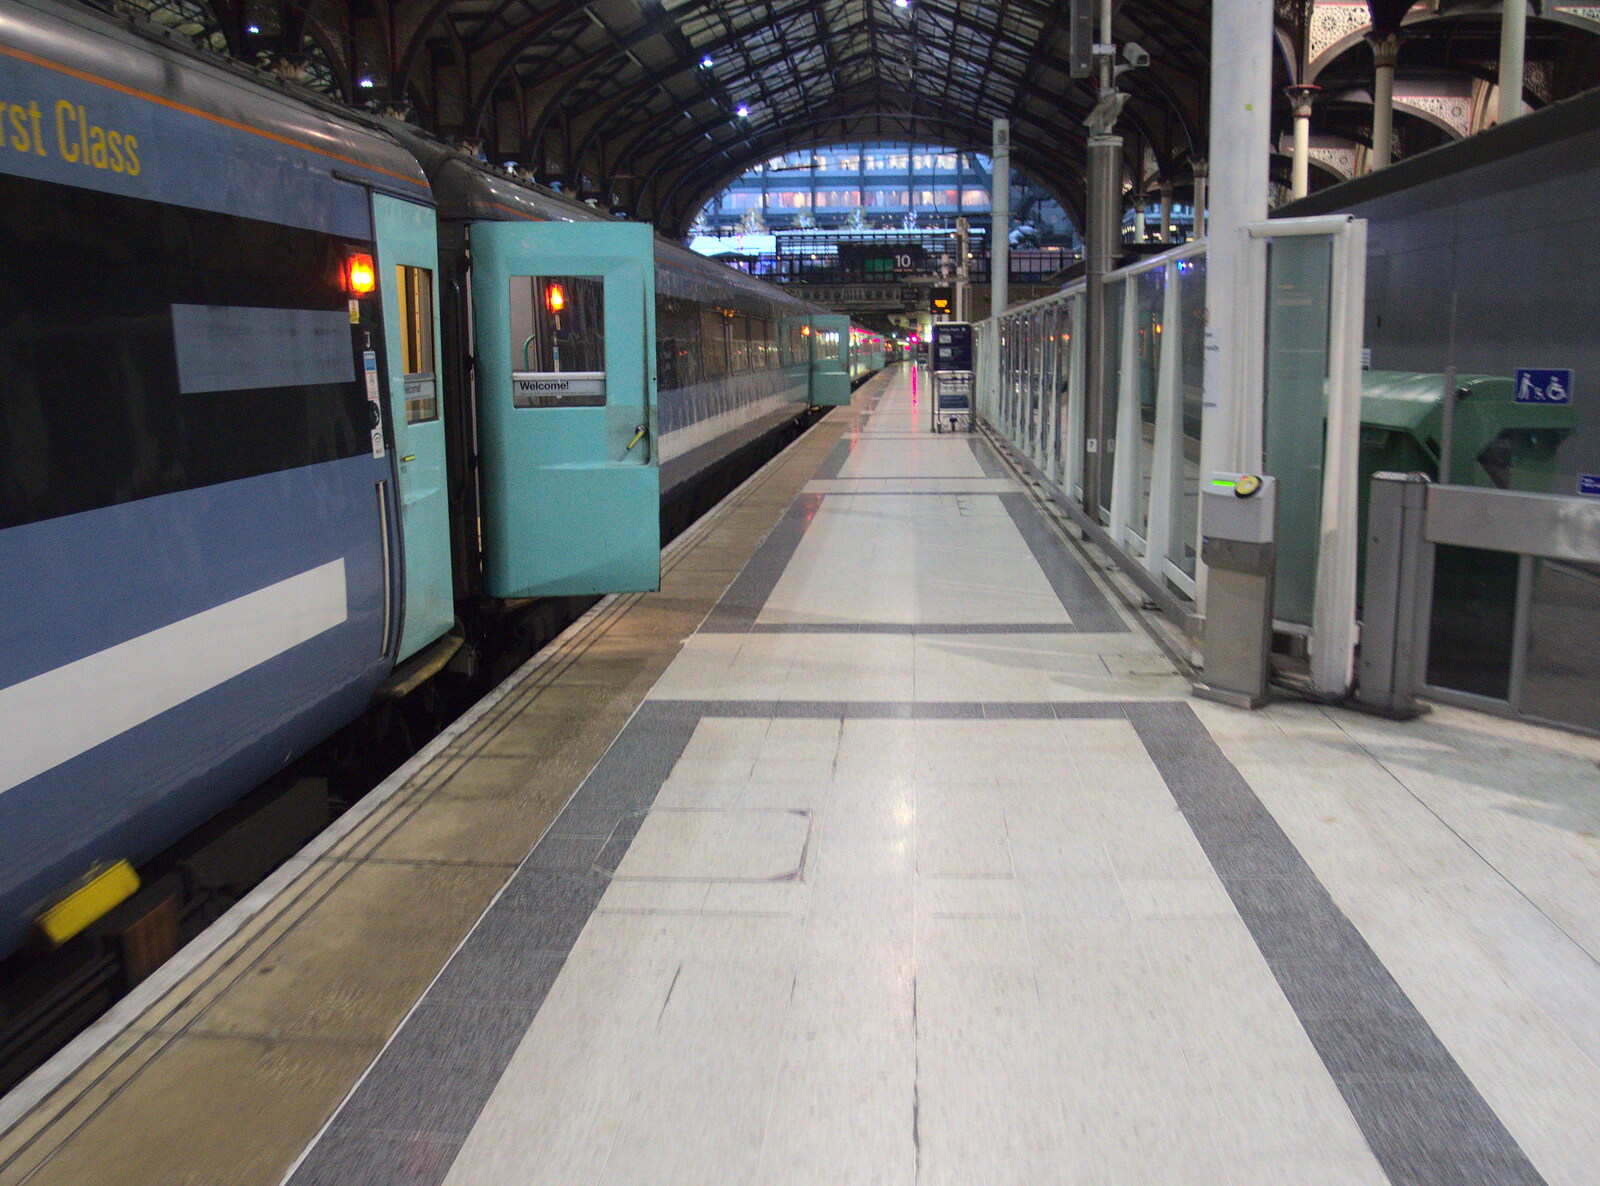 A deserted platform 10 at Liverpool Street from The Lorry-Eating Pavement of Diss, Norfolk - 3rd December